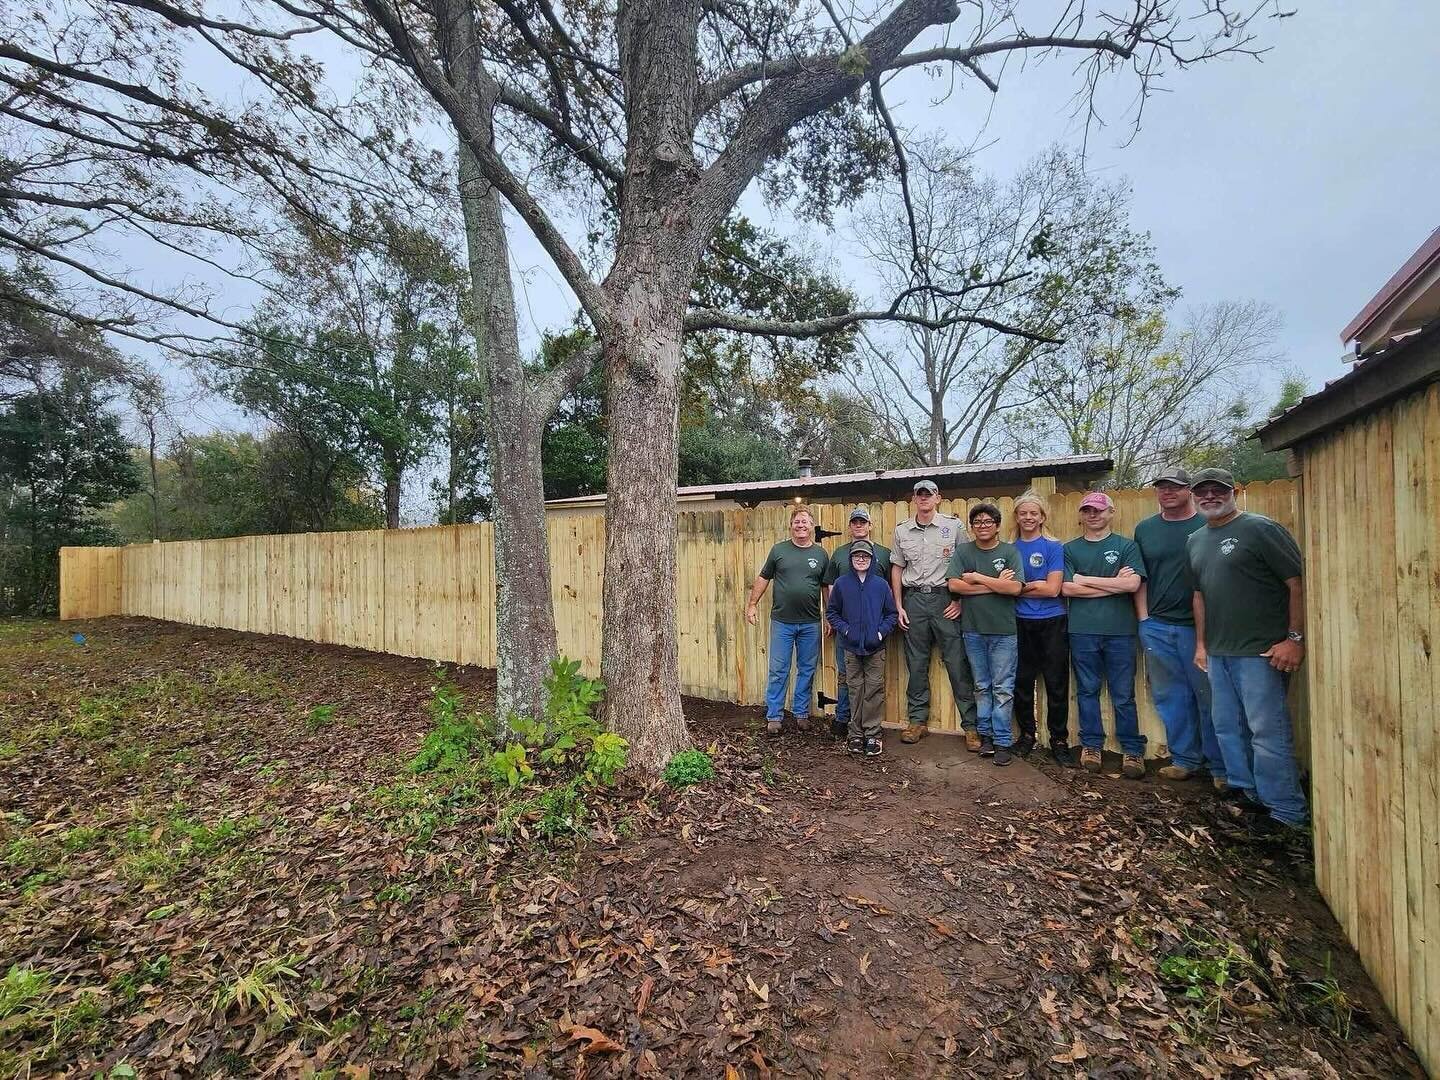 Thank you to our boy scouts (Troop 773) for taking on this amazing project! Thanks to them we have a gate and fencing out on the front (right) side of our building! They did a phenomenal job of knocking this out and in such a timely manner! Once agai